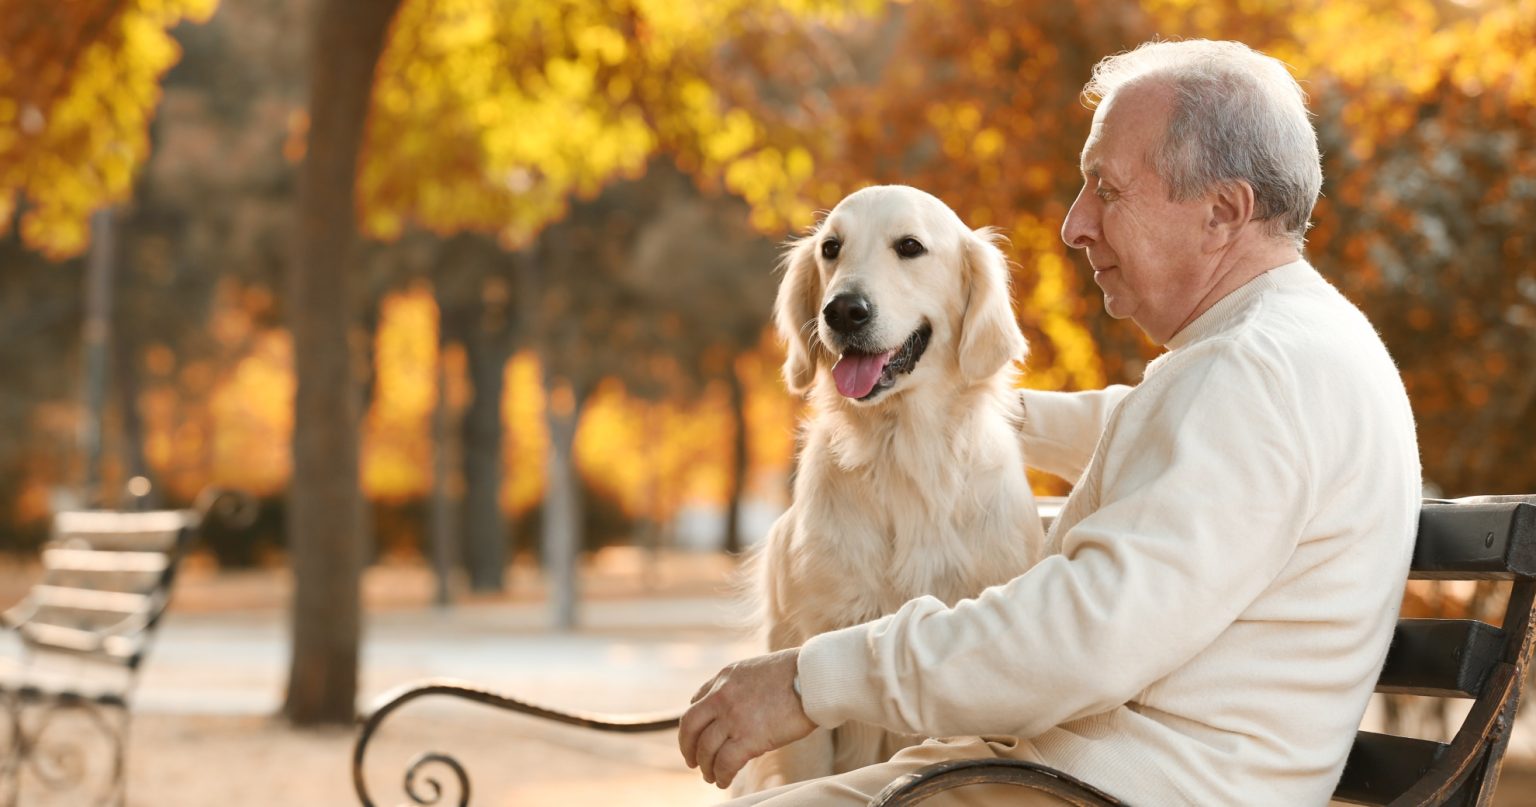 Paws, Companionship, and Well-Being: The Indispensable Role of Pets in Human Life